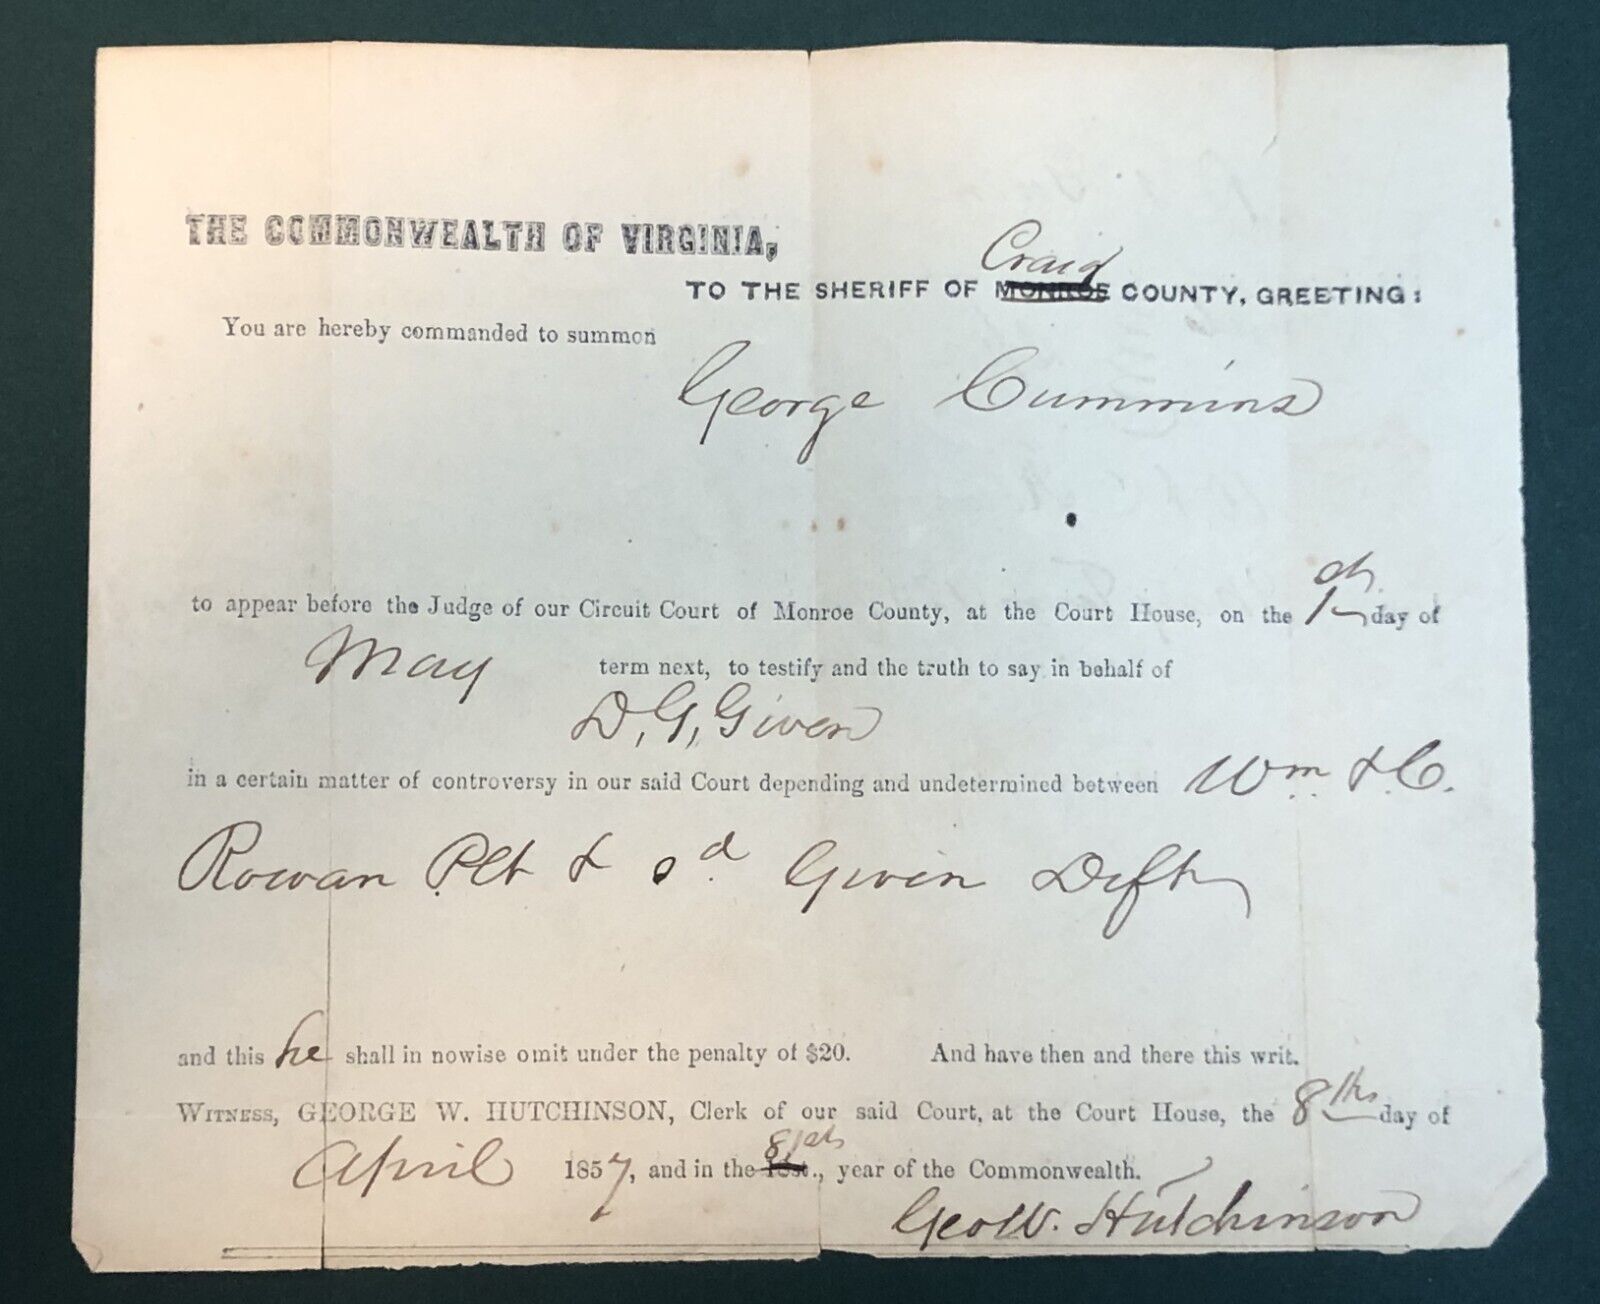 April 8, 1857 Craig County Virginia Court Summons George Cummins D.G Given